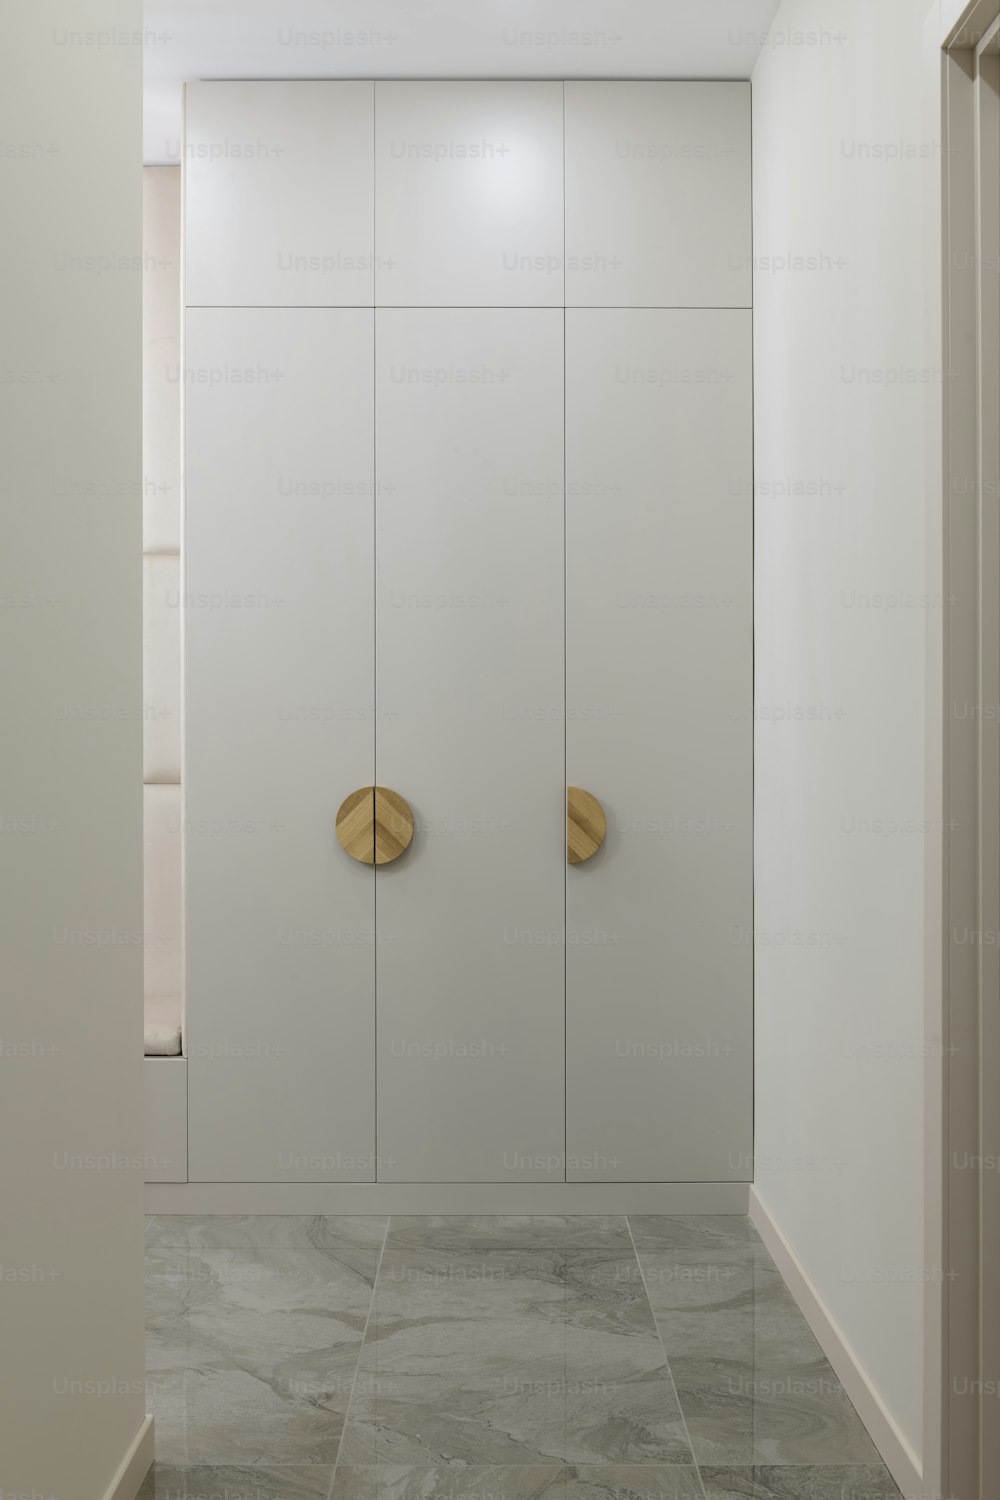 a bathroom with a white wall and two gold doors